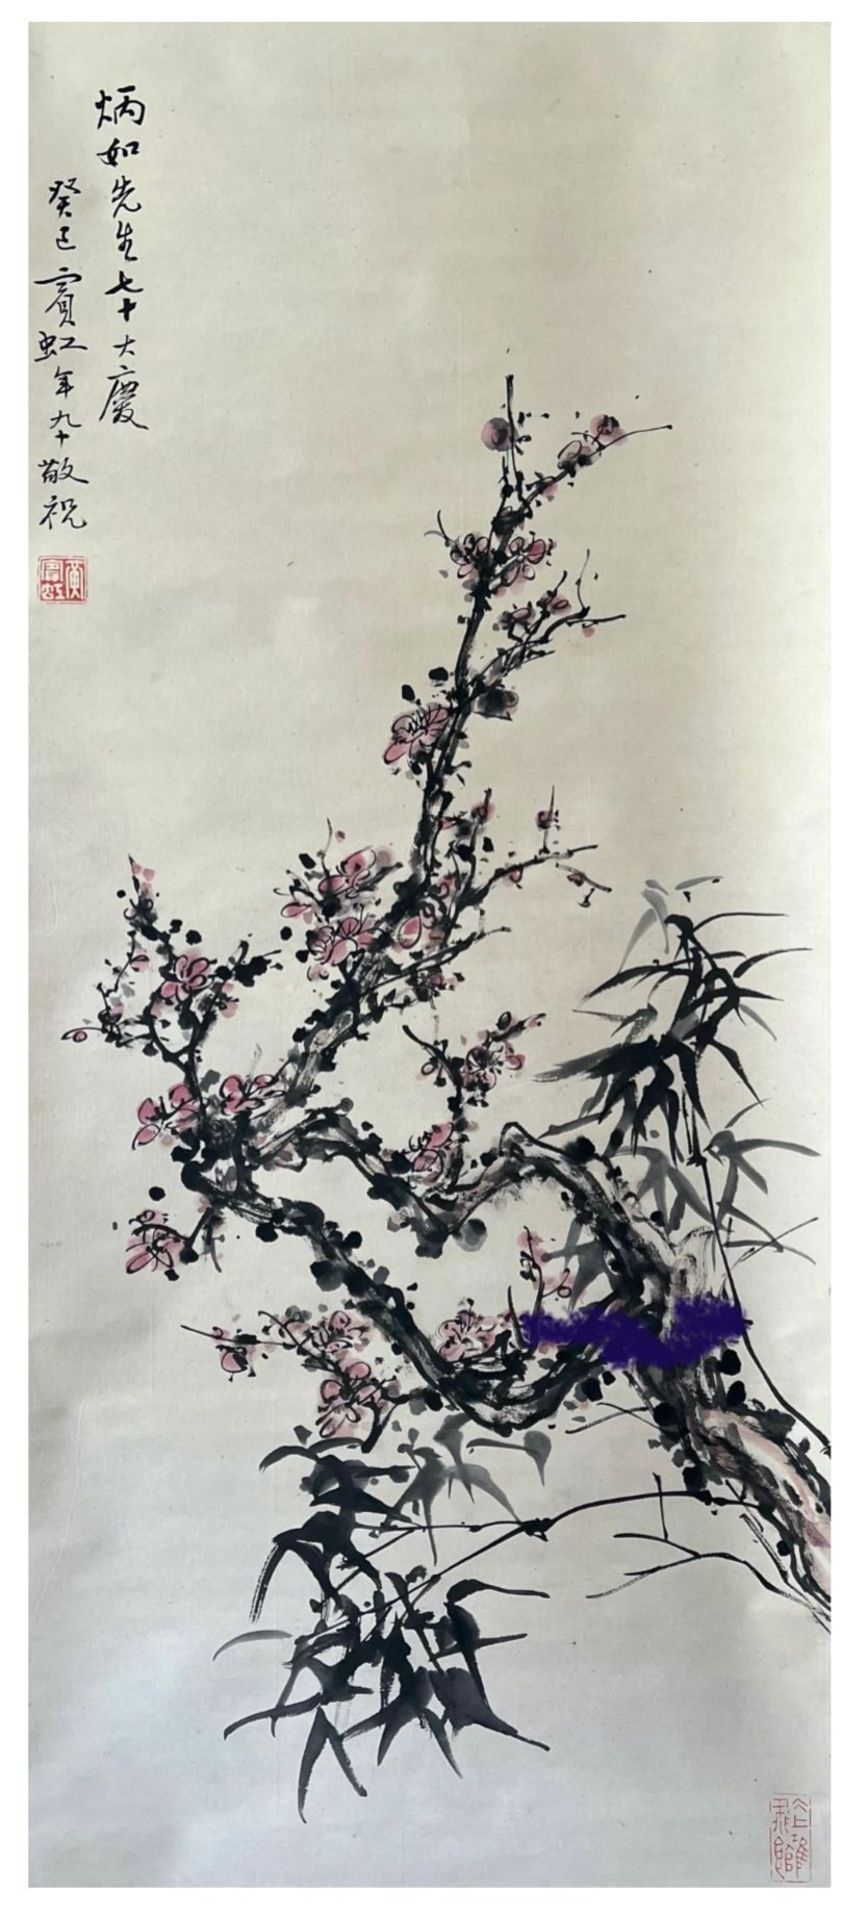 Plum blossom and bamboos - Chinese ink and watercolour on paper scroll. In memory of the noble - Image 3 of 7